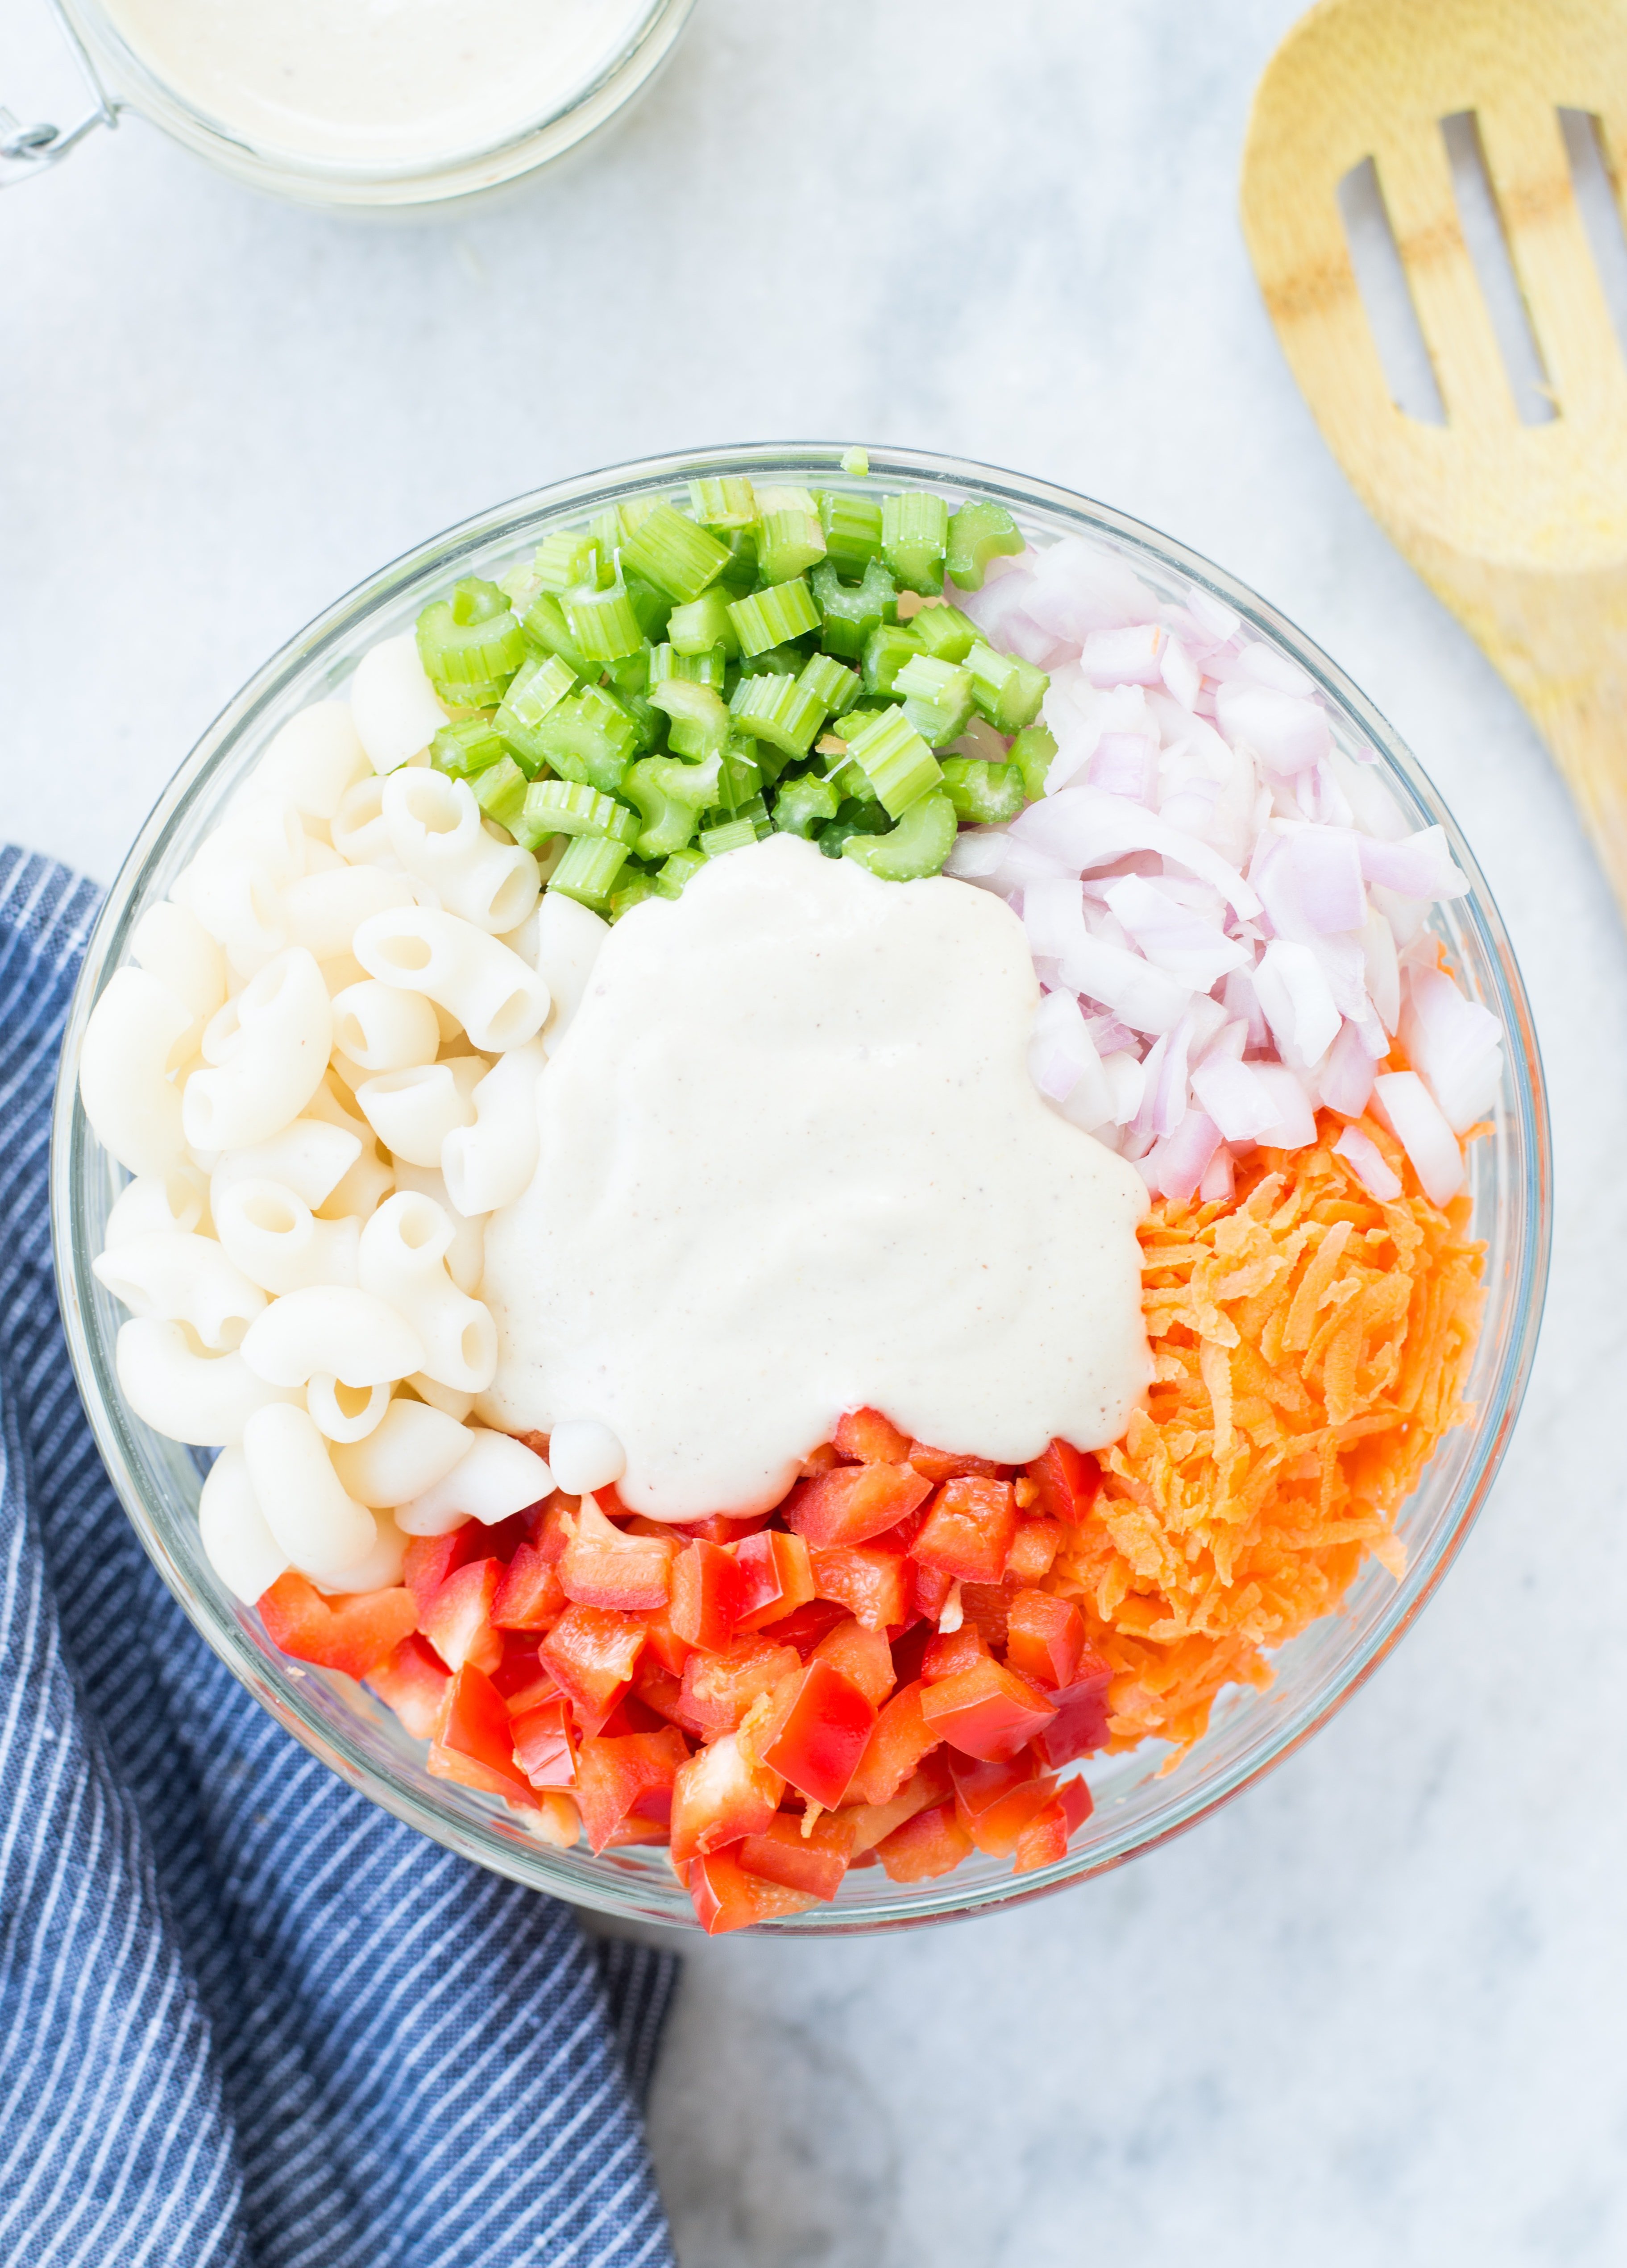 Delicious Vegan Macaroni Salad is a perfect side for Picnic, potluck or Barbecue. This Vegan Pasta salad is creamy with crisp vegetables and a light Tahini Cashew Dressing.